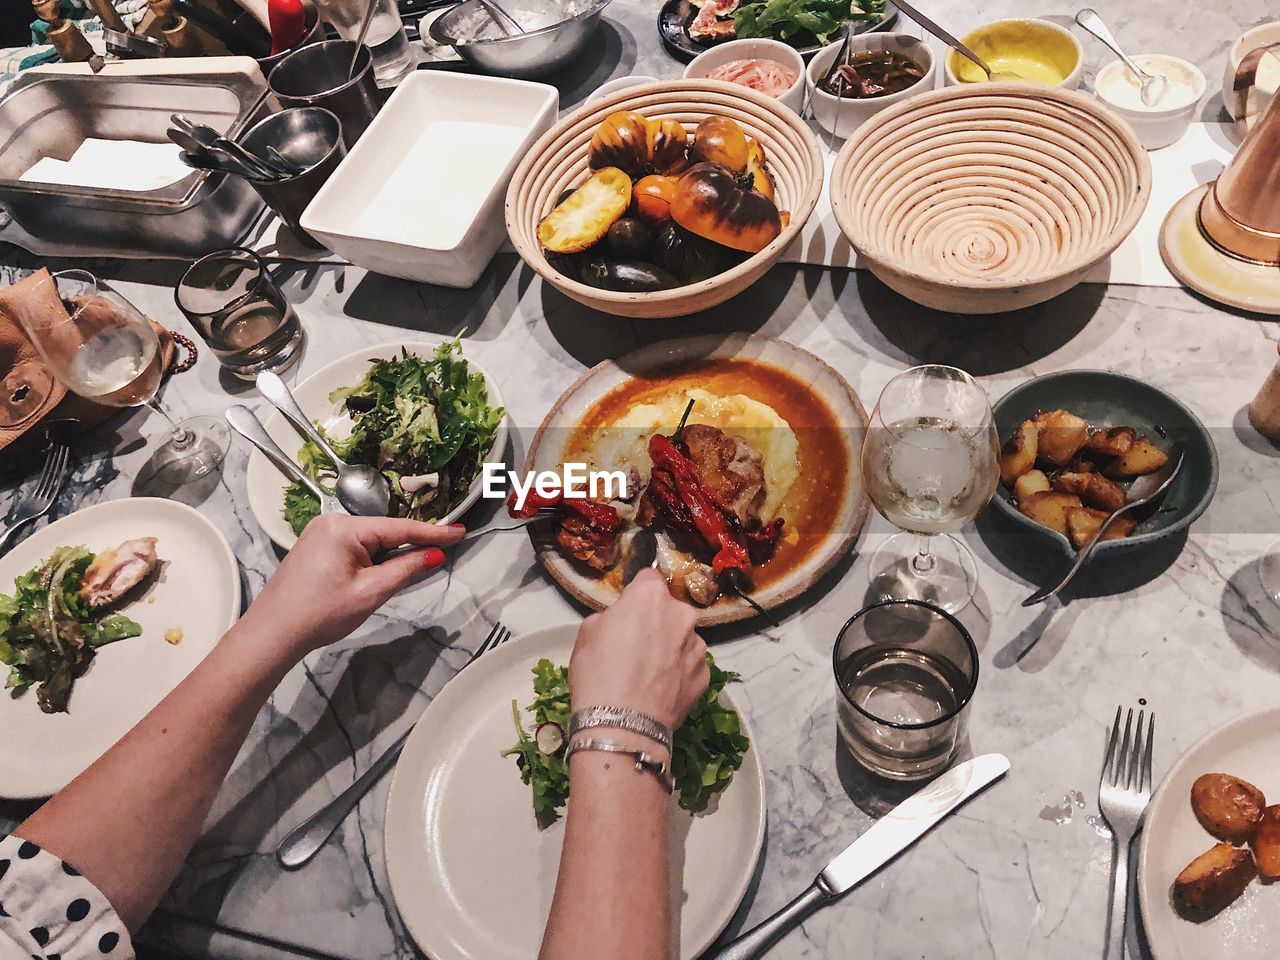 Cropped hands of woman having food at table